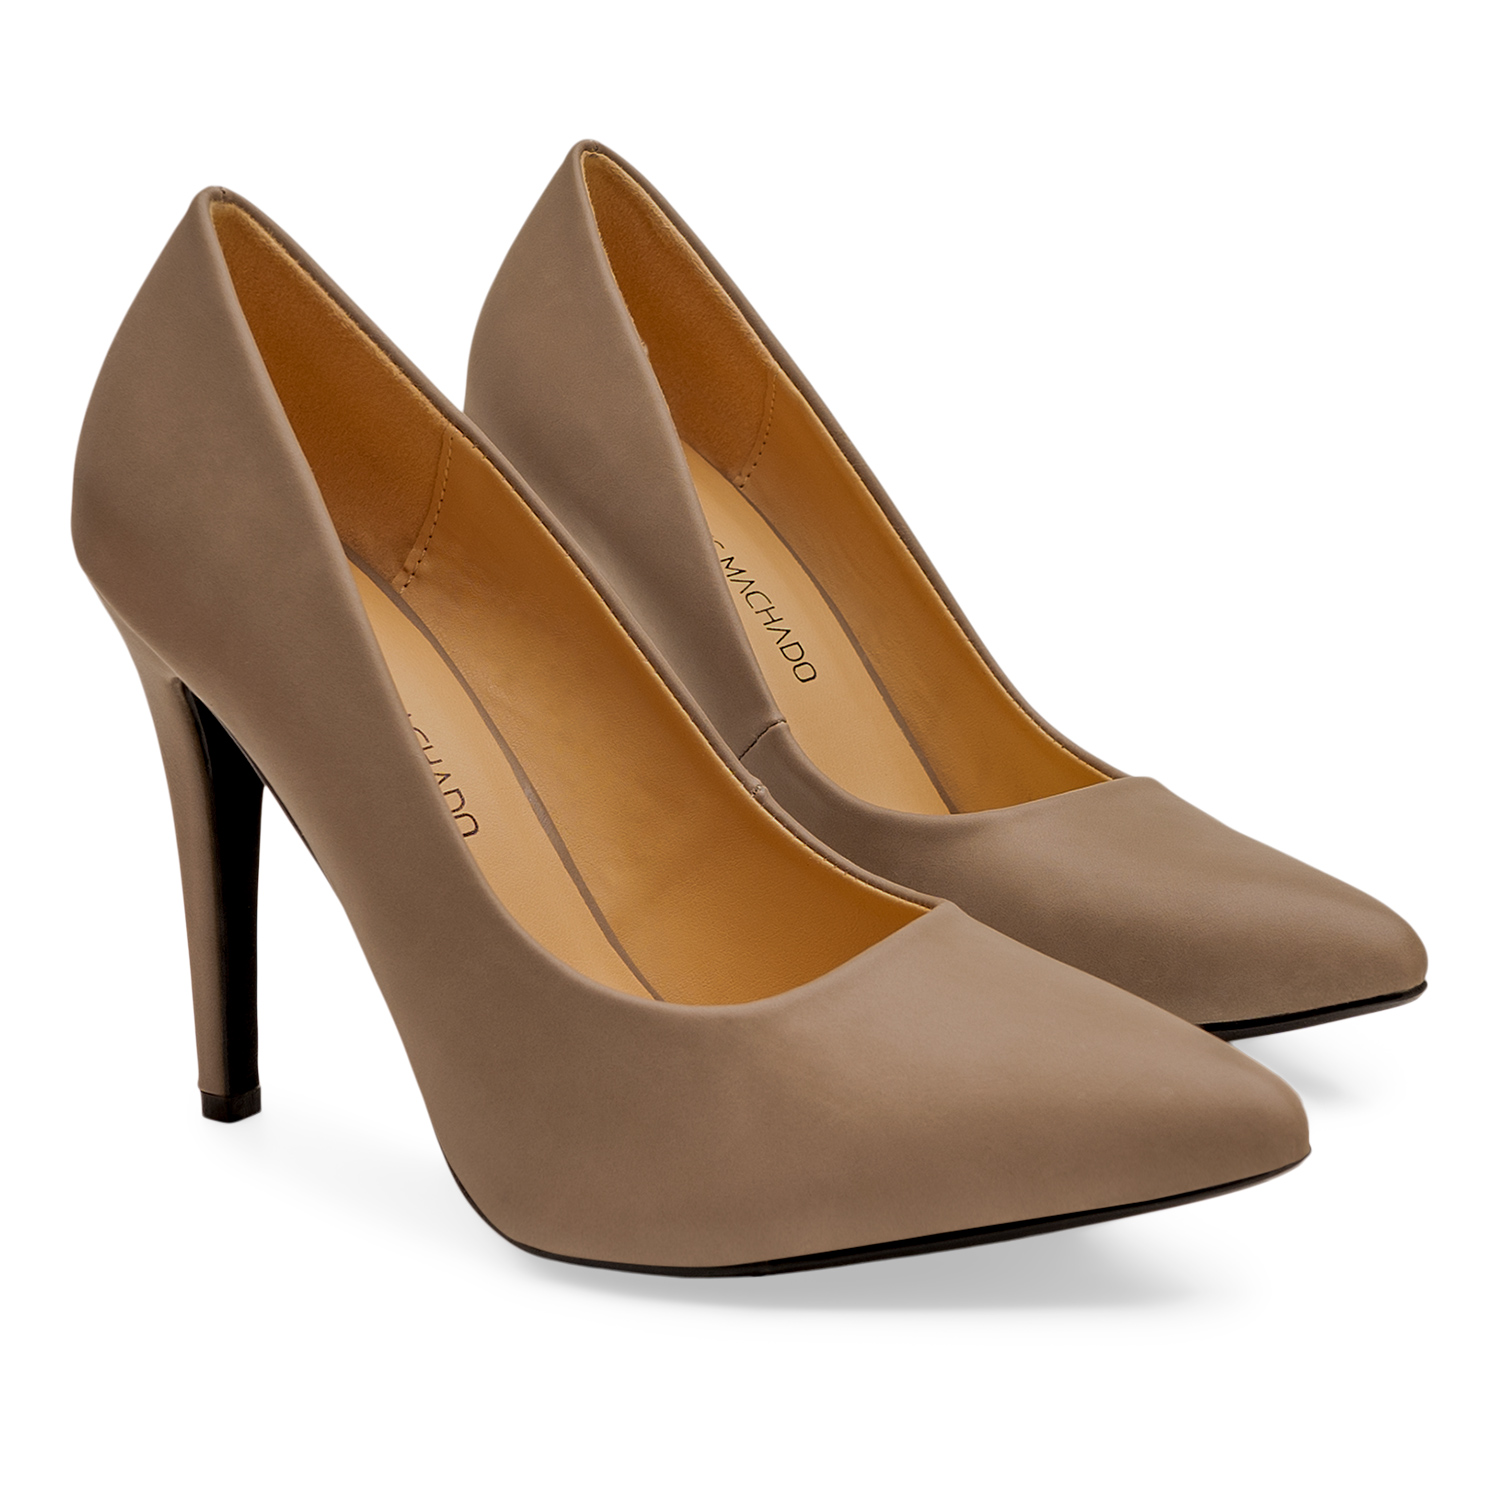 Heeled shoes in light brown faux leather 